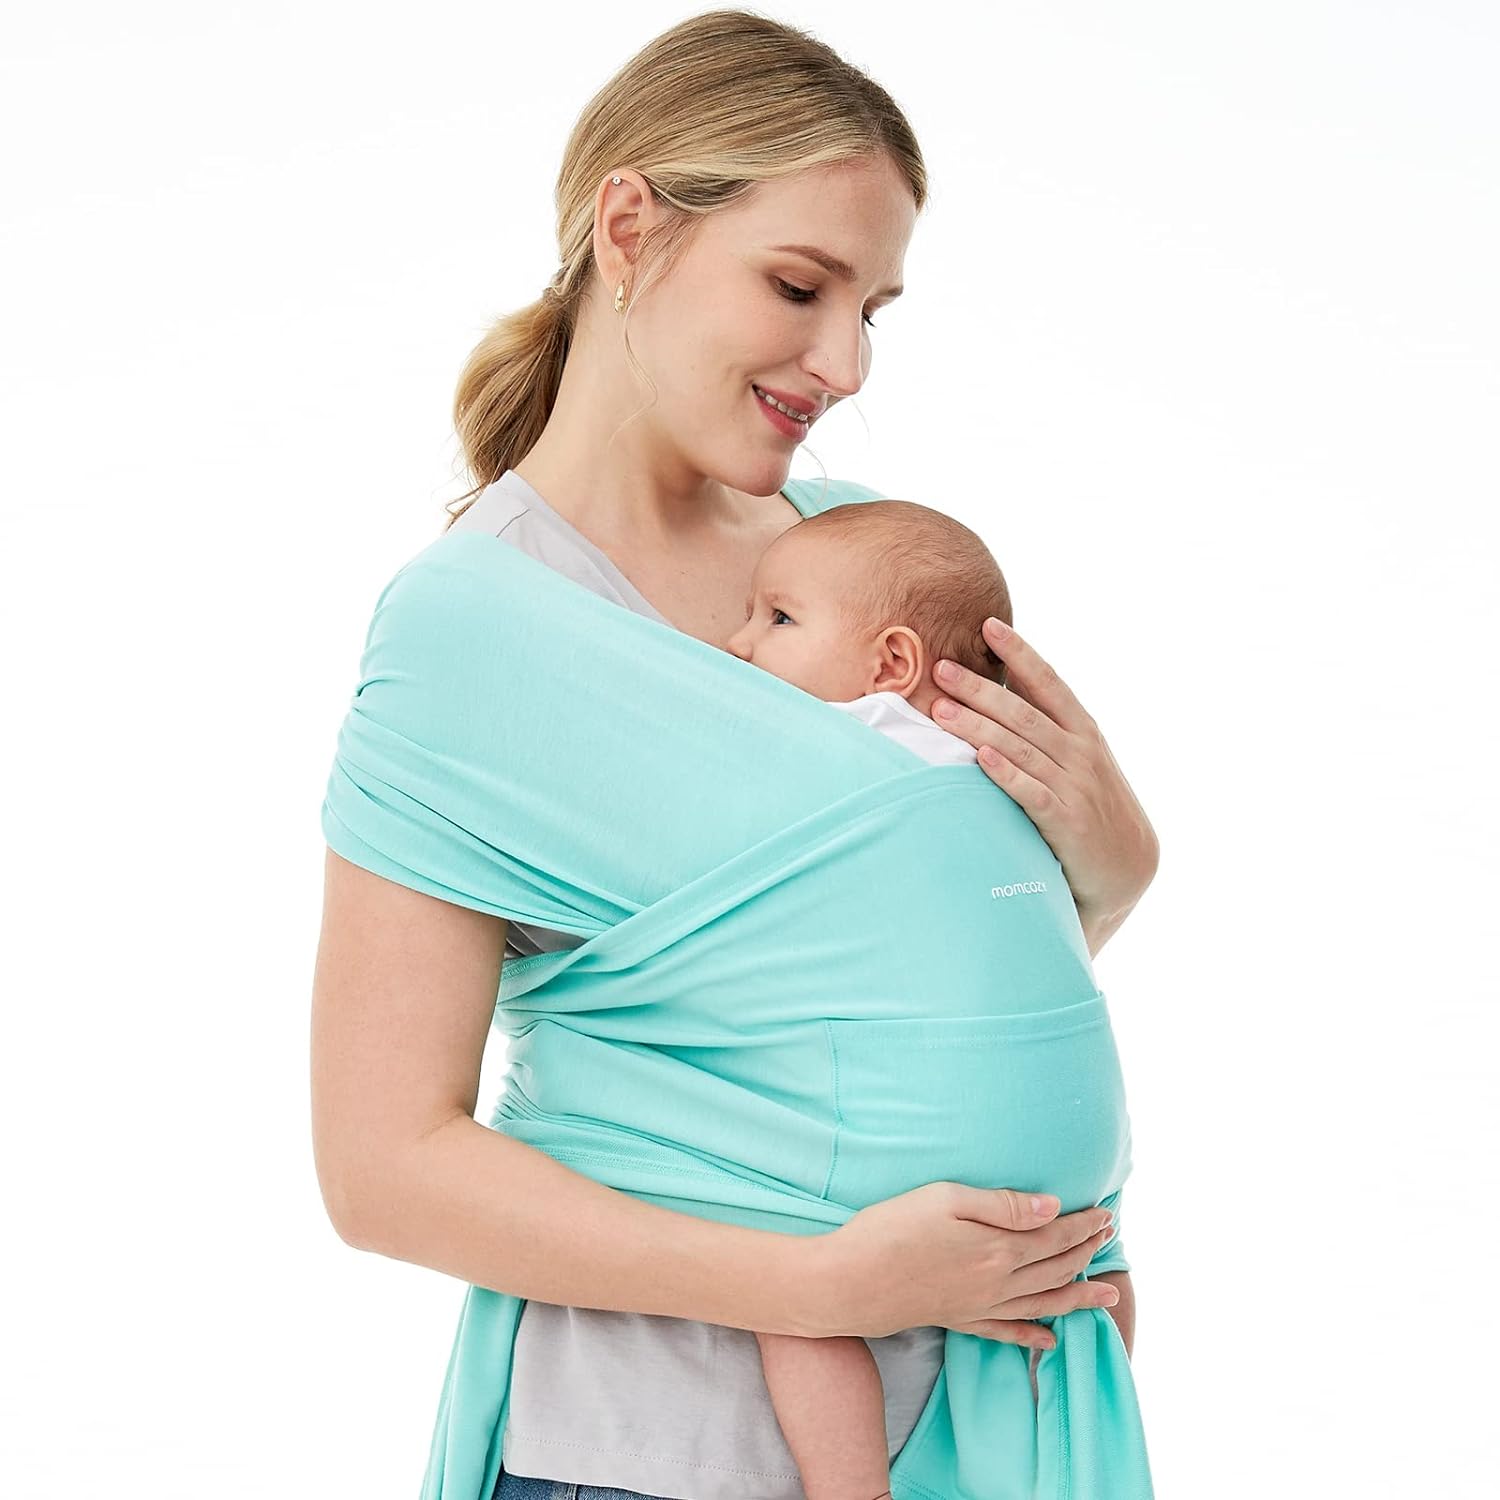 🌟 Limited-Time Specials 🌟 Momcozy Baby Wrap Carrier 40% Off! Act Now to Save 13.6$!